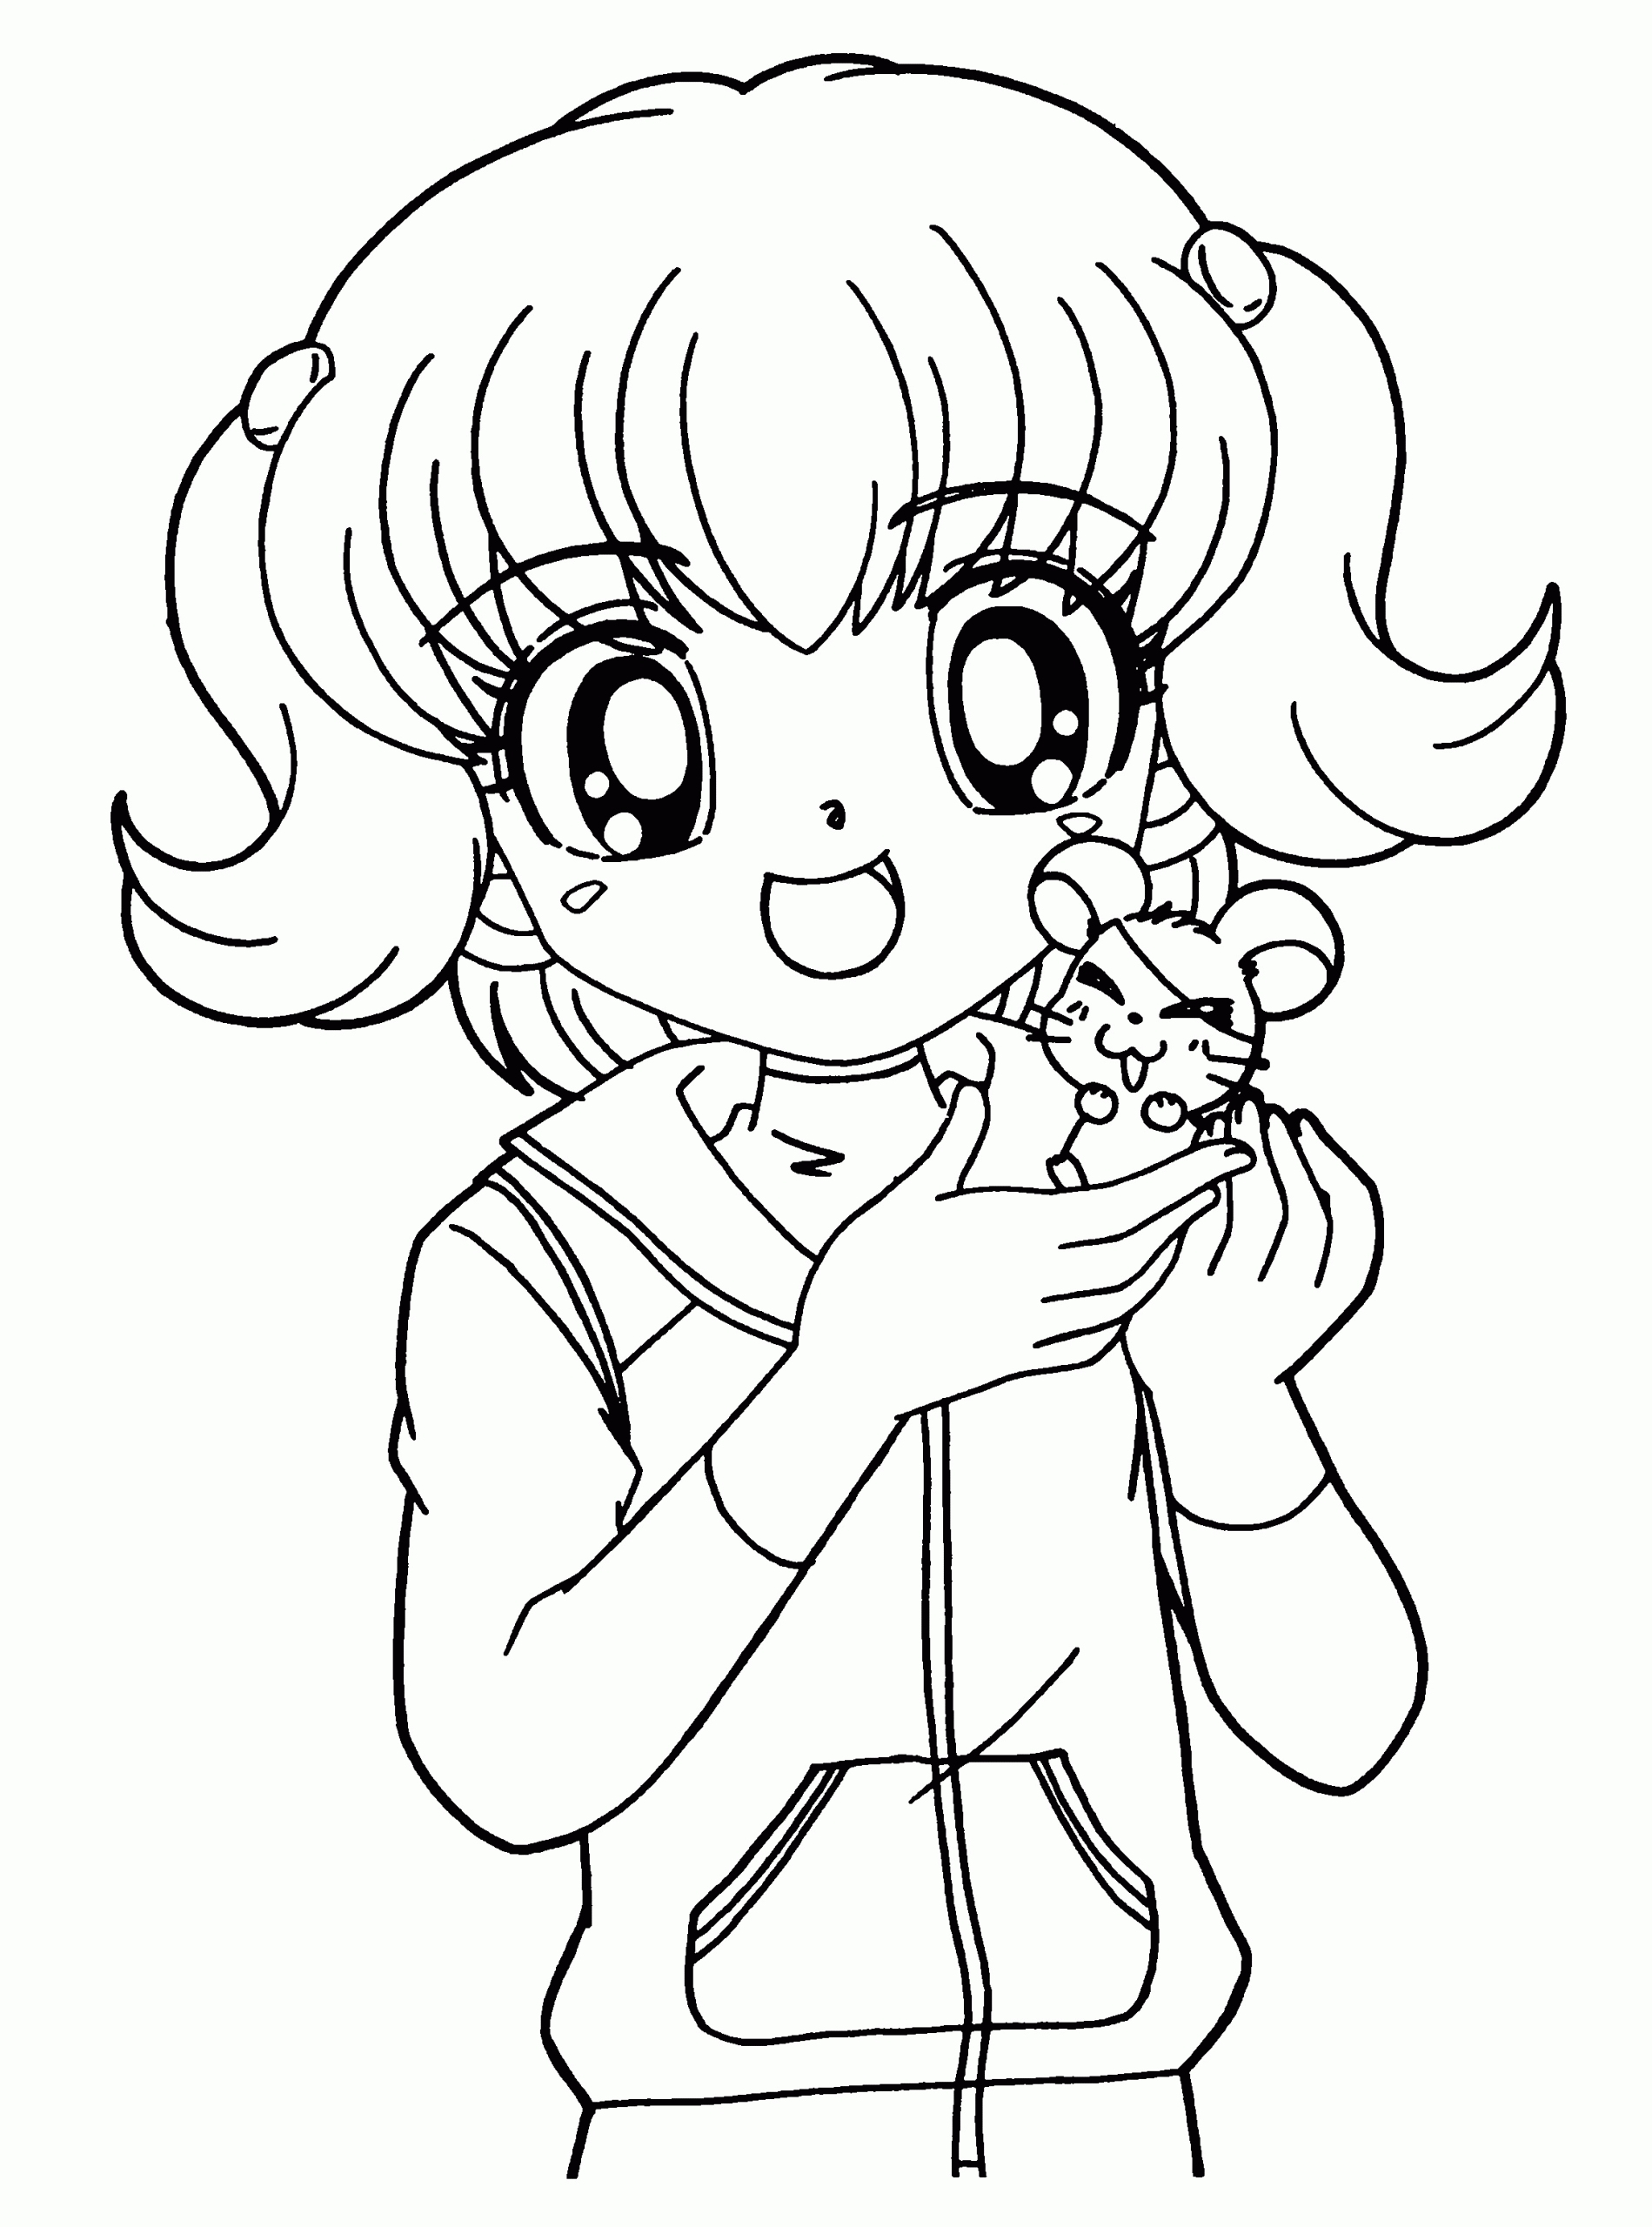 Kawaii Coloring Pages For Girls
 Anime Coloring Pages Best Coloring Pages For Kids